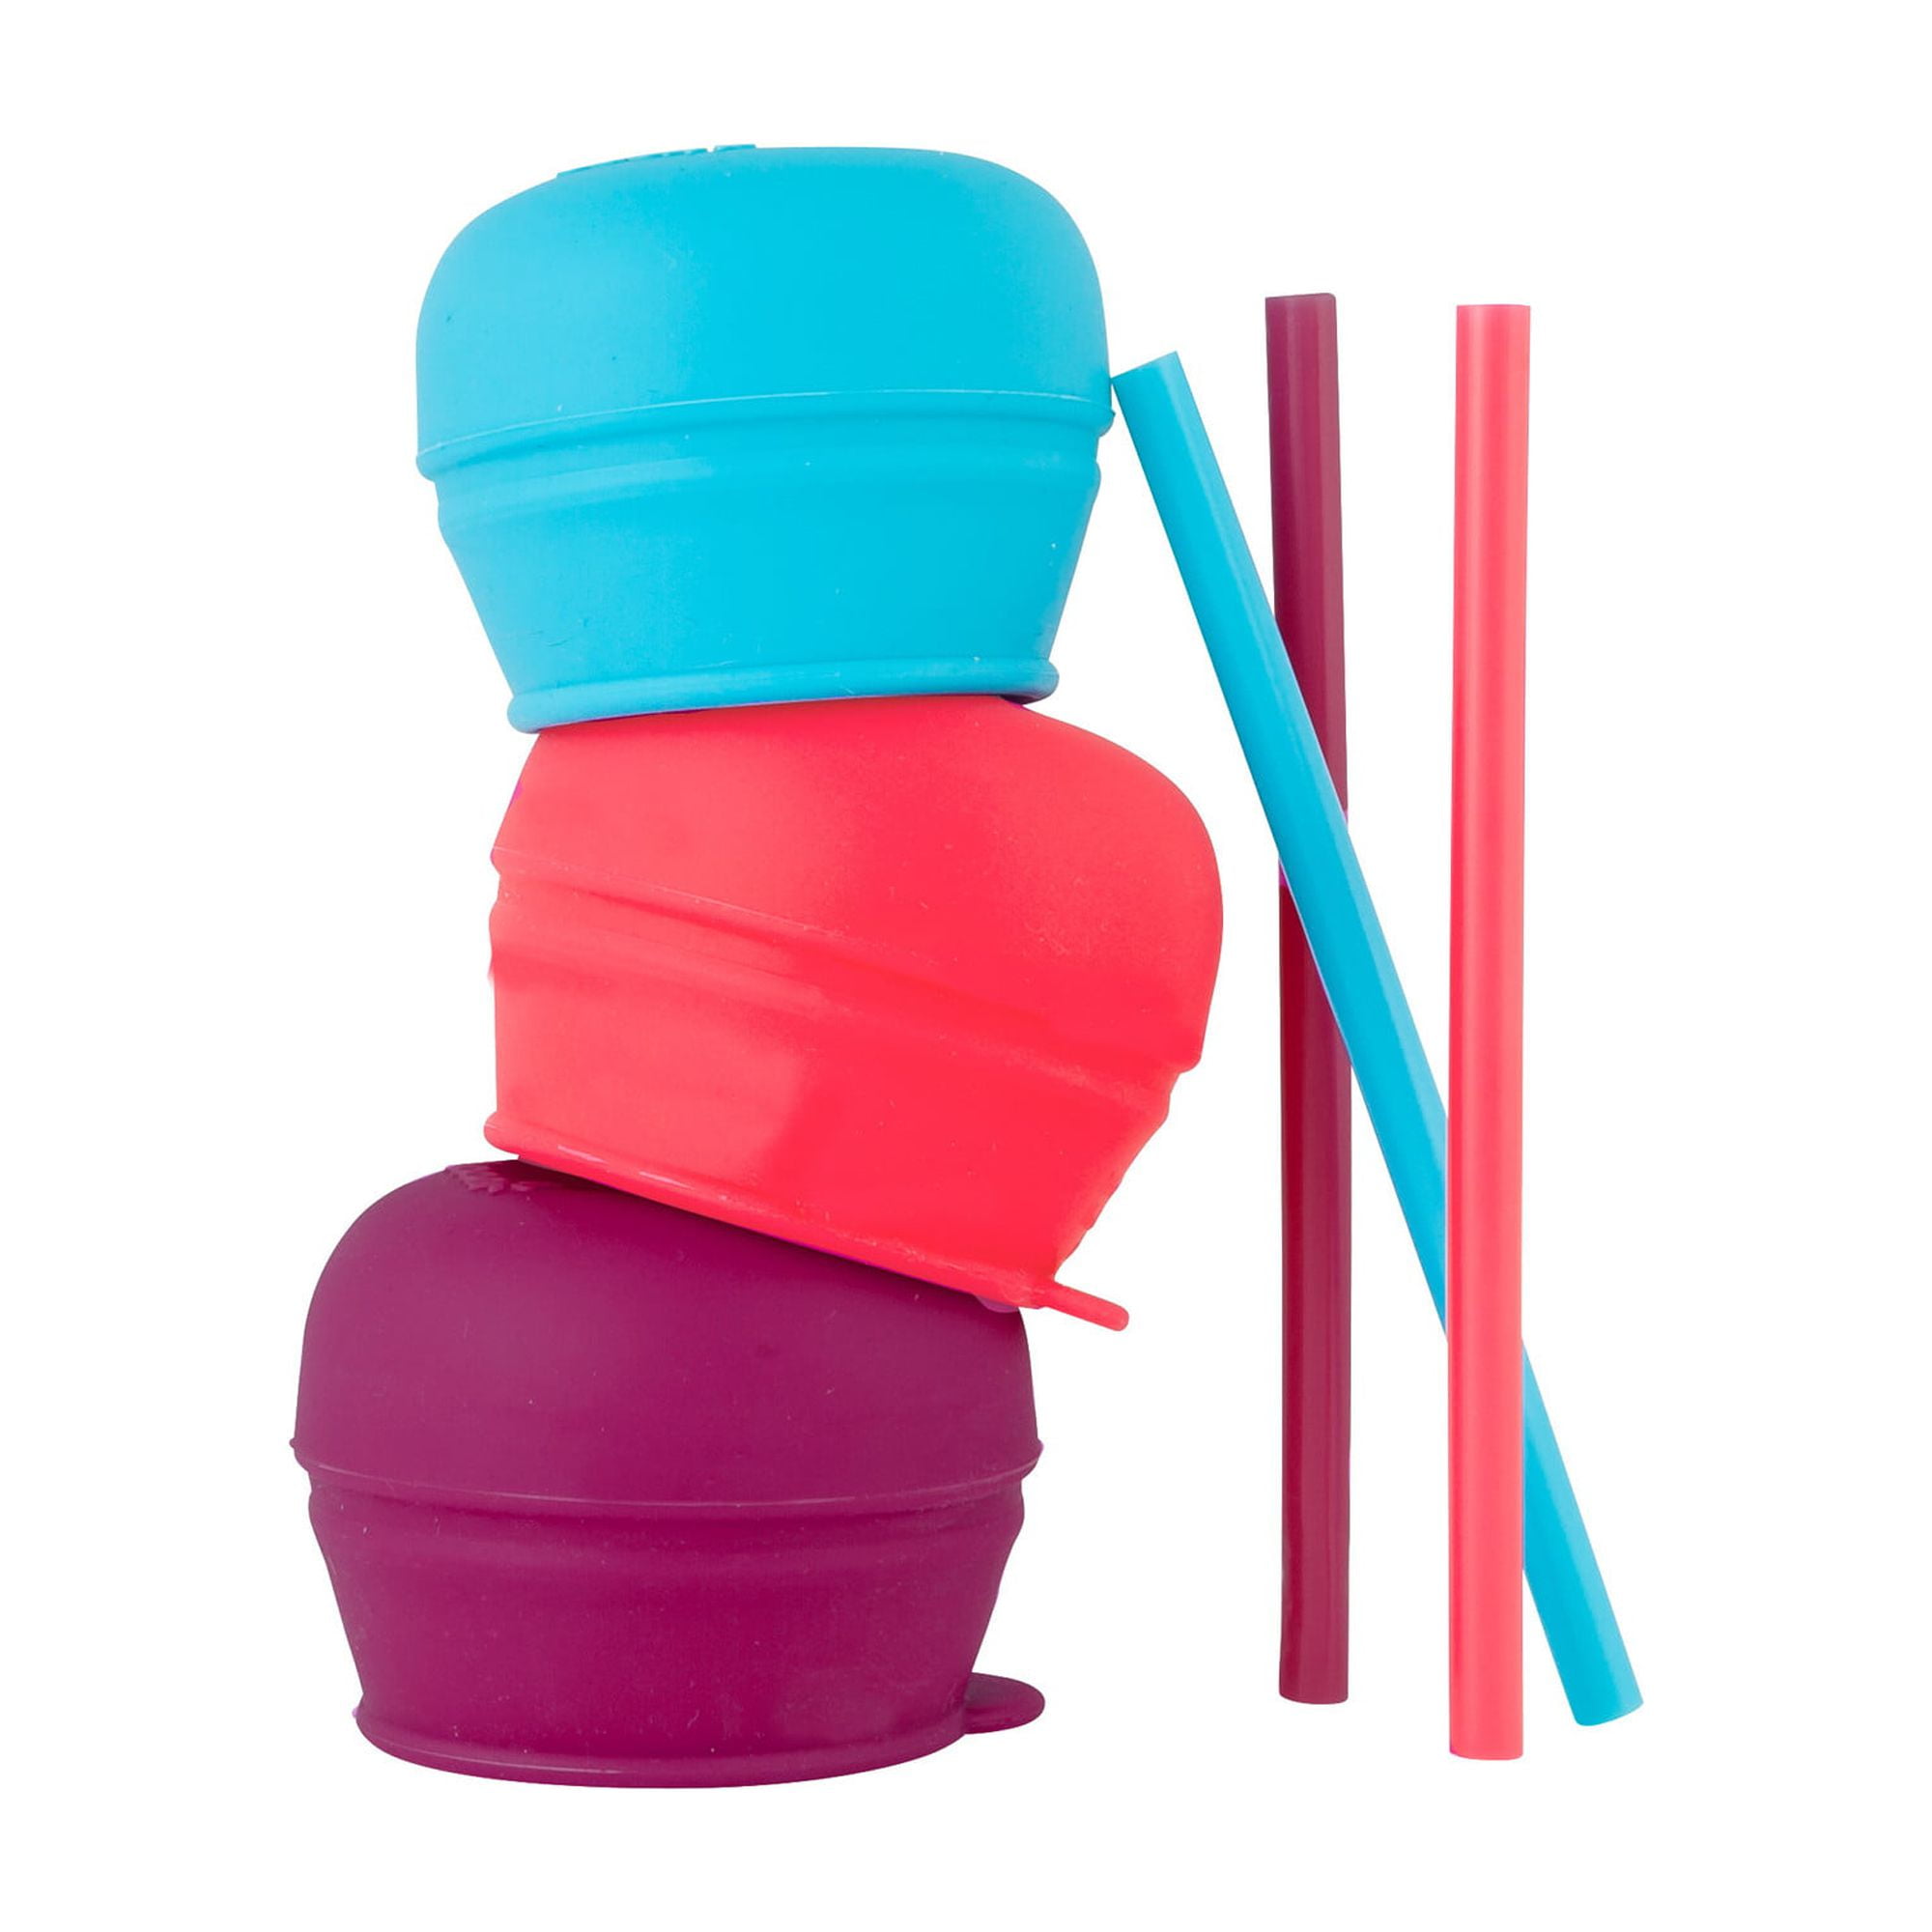 Boon SNUG Silicone Straw Cup - Includes 3 Stretchy Sippy Cup Lids, 3  Straws, and Toddler Cup - Conve…See more Boon SNUG Silicone Straw Cup -  Includes